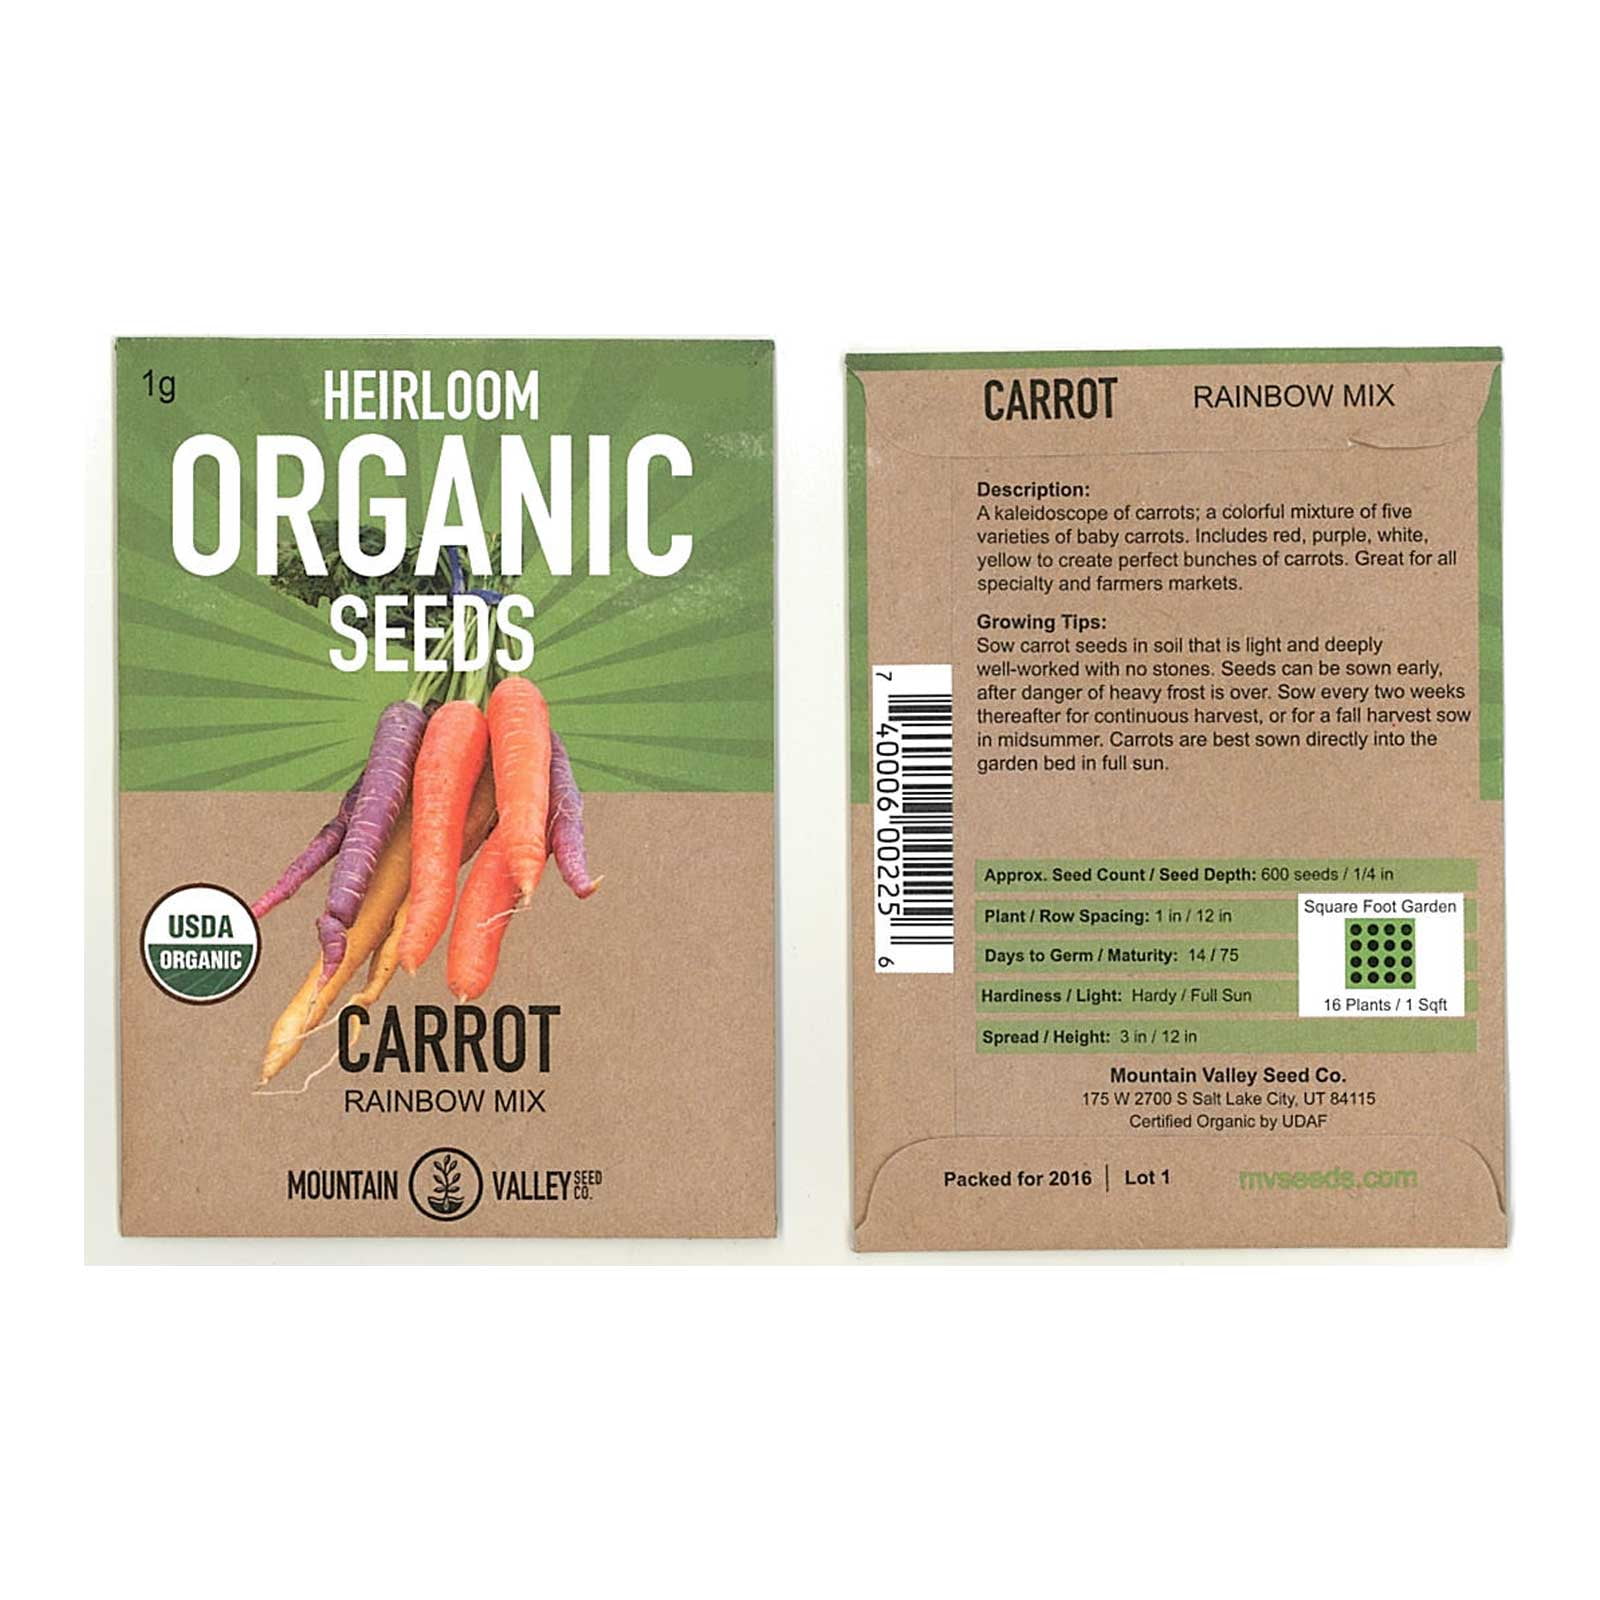 ORGANICALLY GROWN Rainbow Blend Carrot Seeds Heirloom NON-GMO Flavorful USA 150 